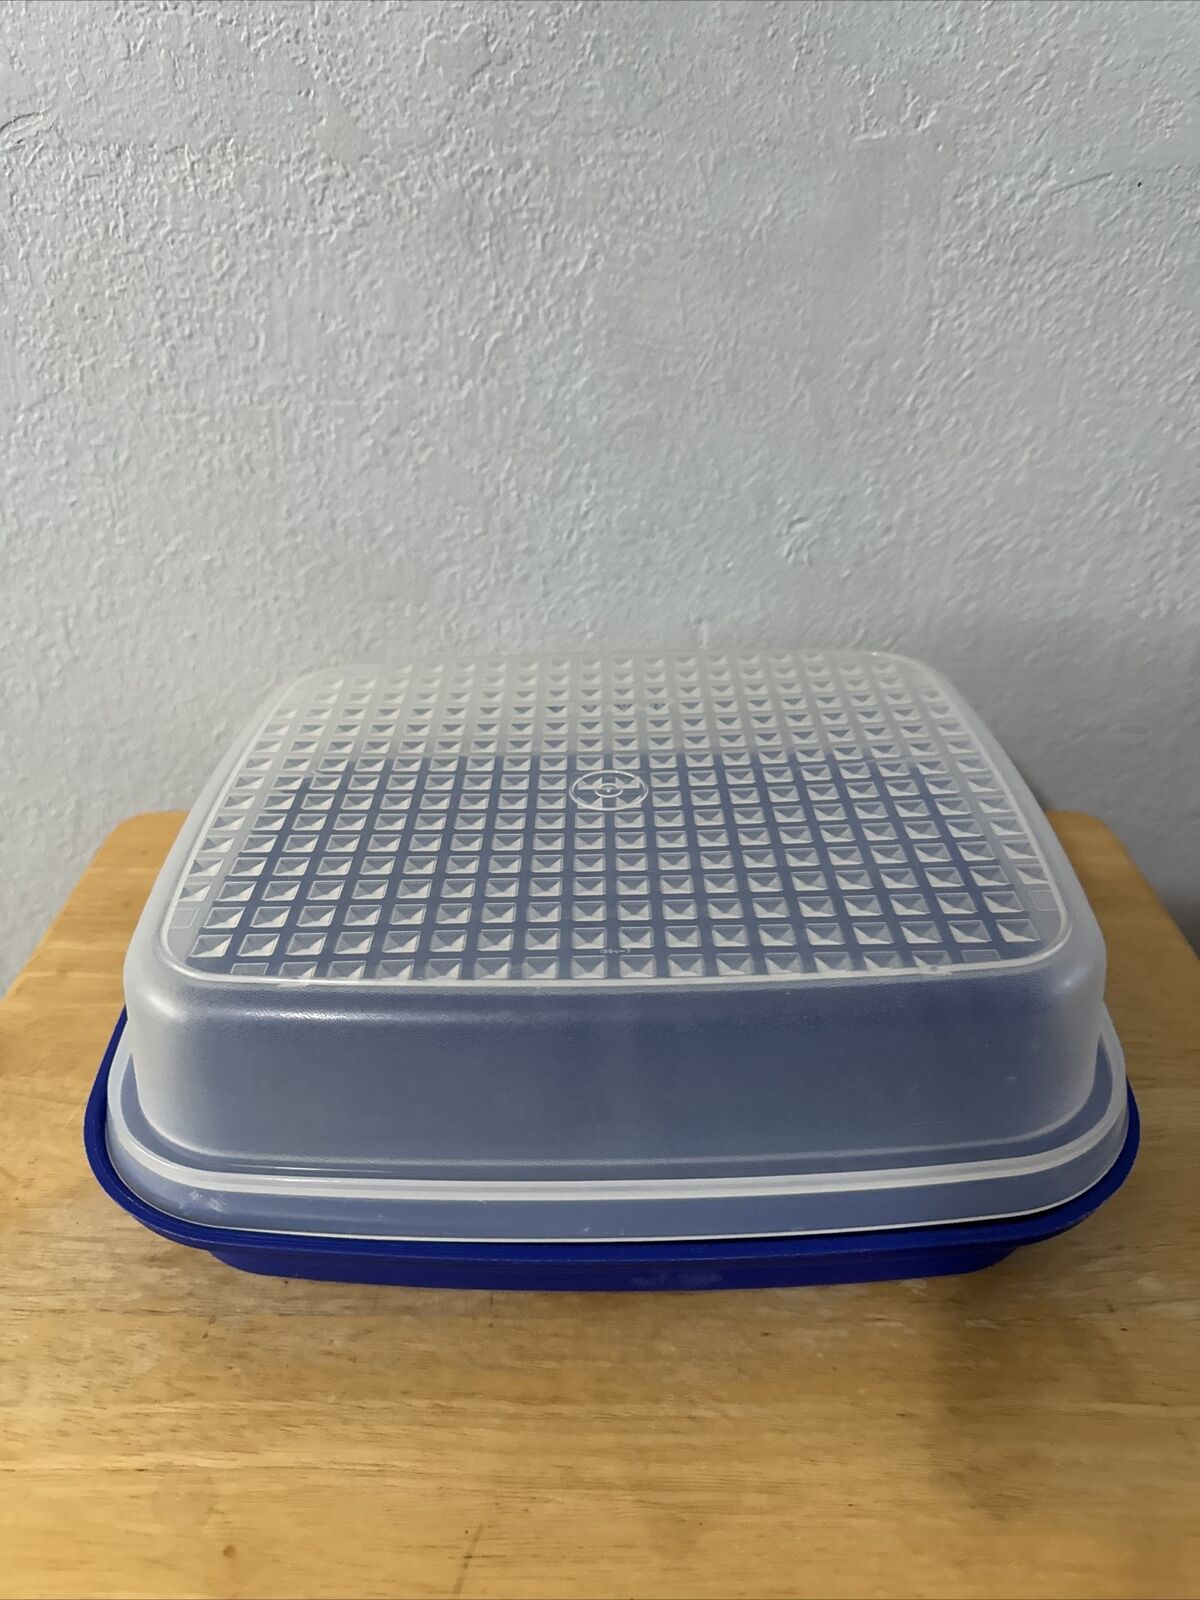 Tupperware Marinade Container 1295 Blue Season Serve with Lid -VINTAGE